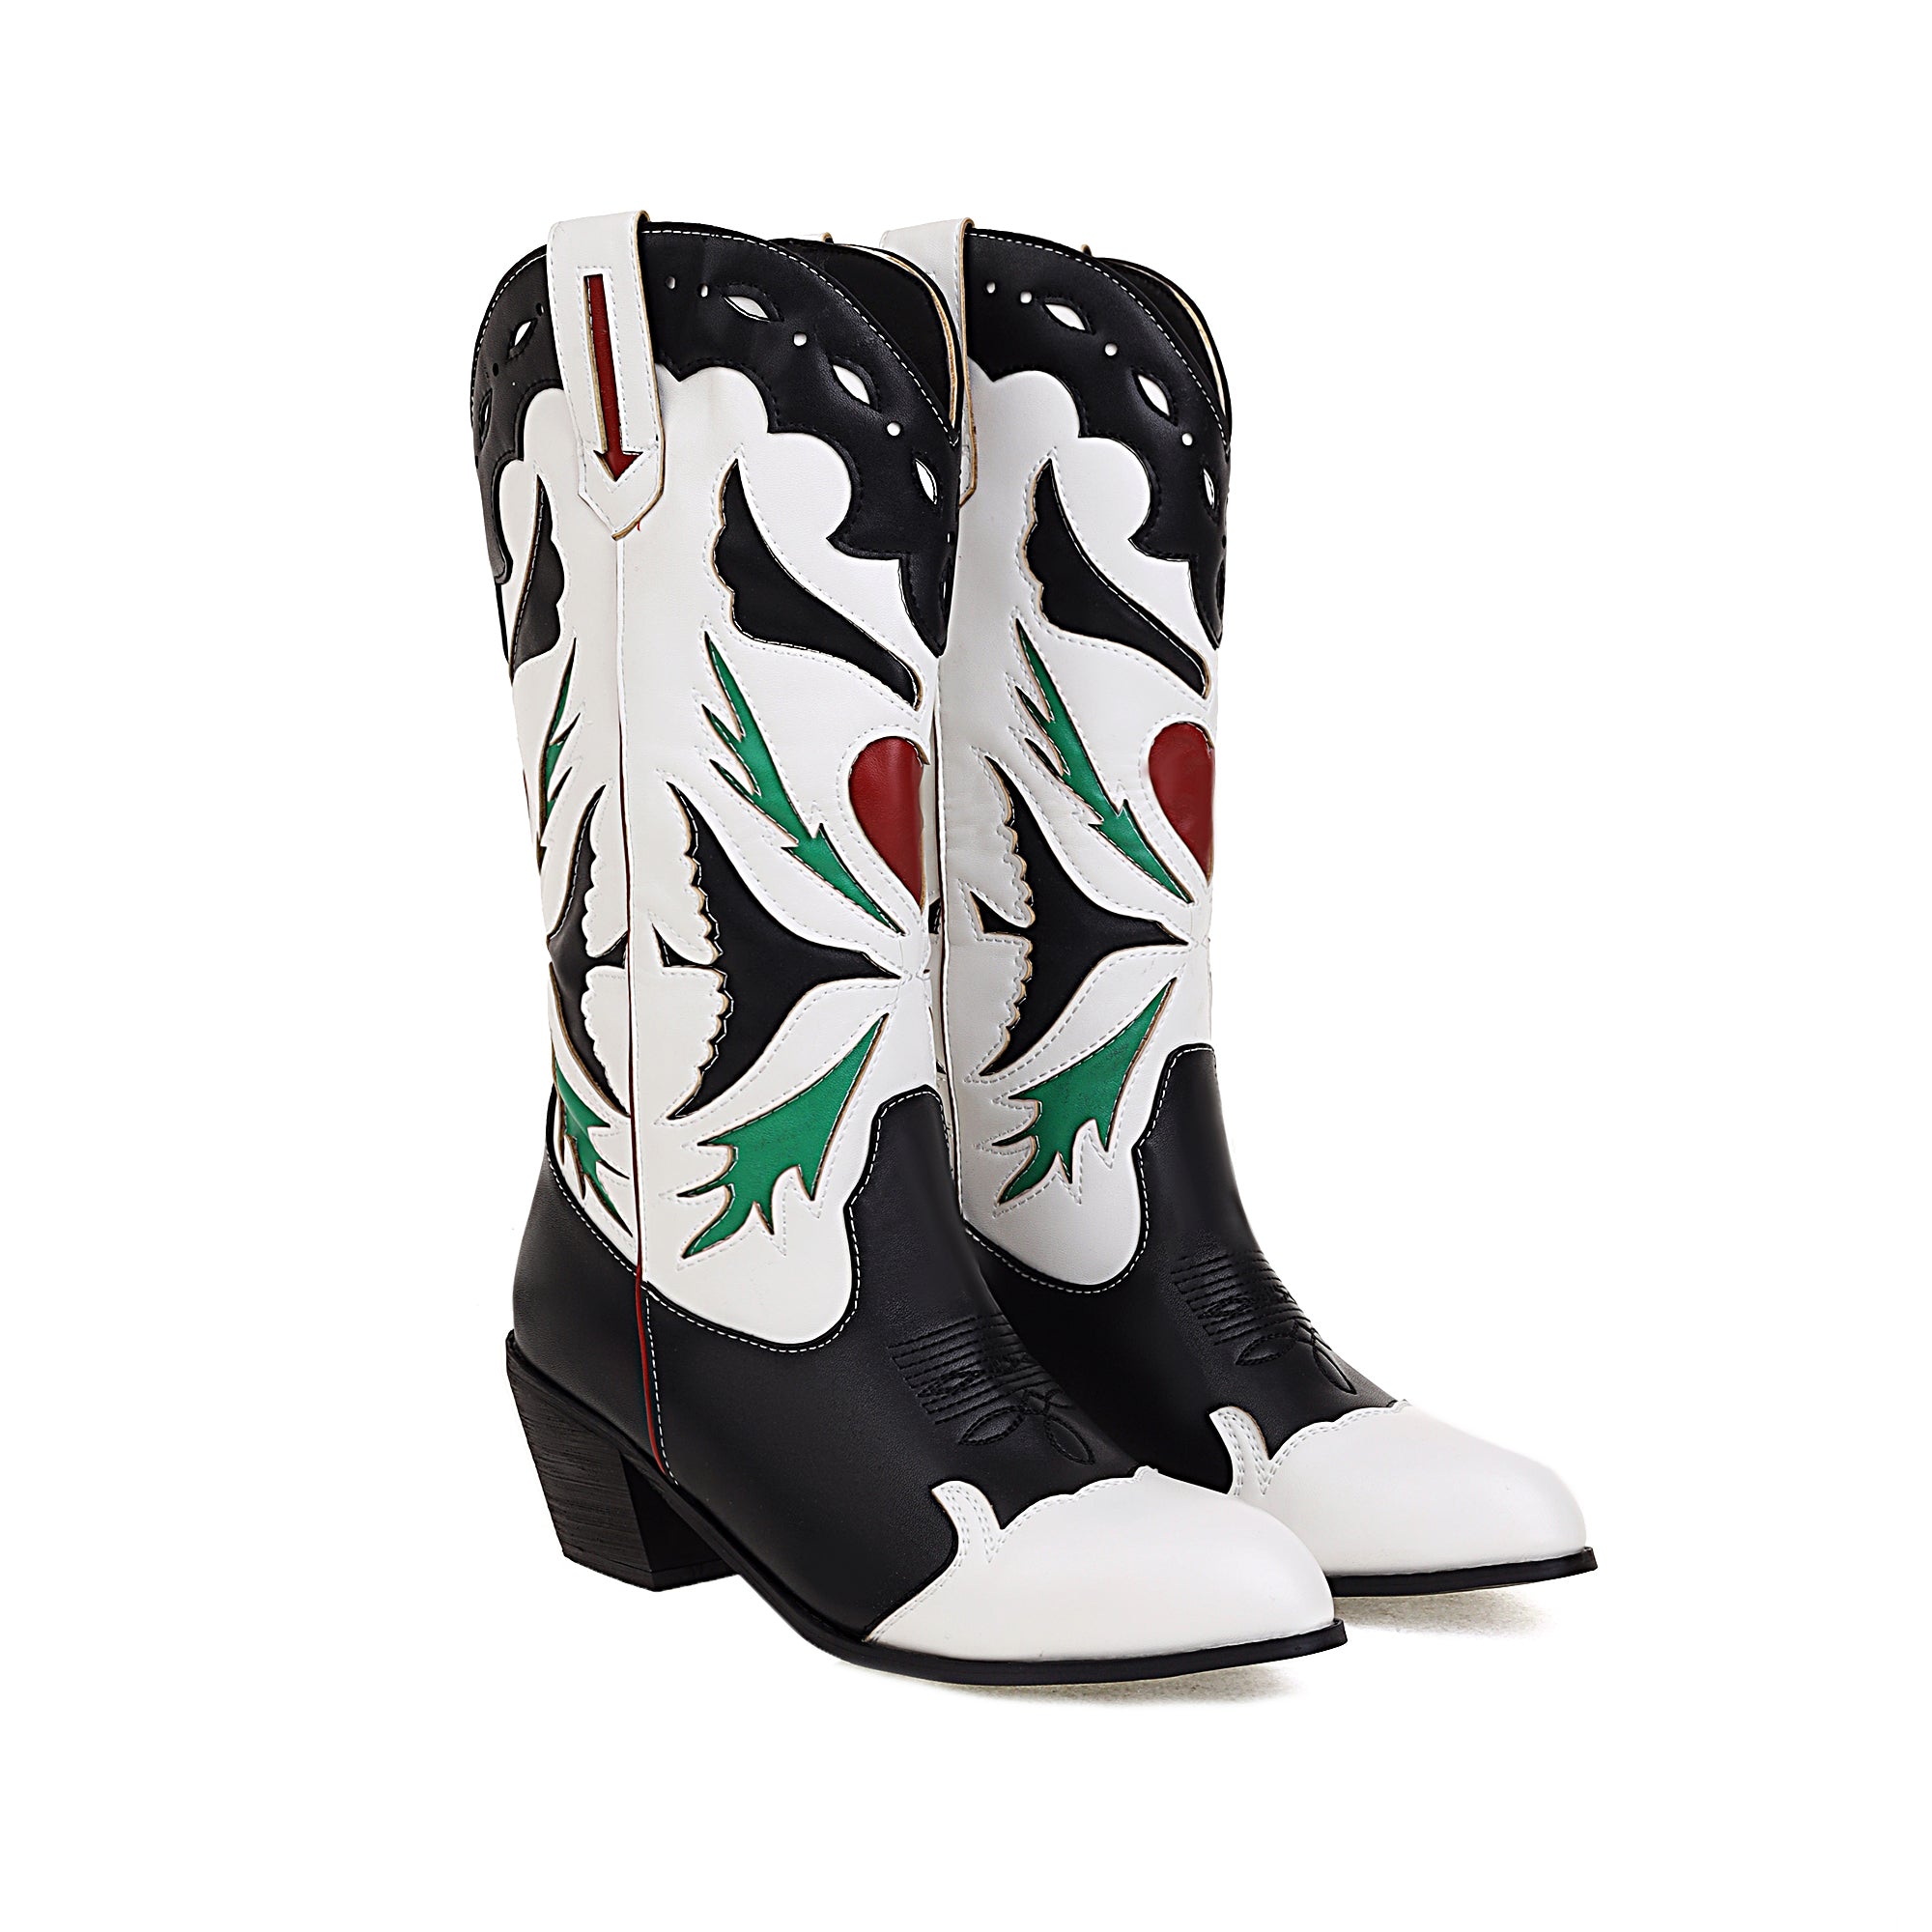 Bigsizeheels Western vintage Spring embroidery boots - White freeshipping - bigsizeheel®-size5-size15 -All Plus Sizes Available!